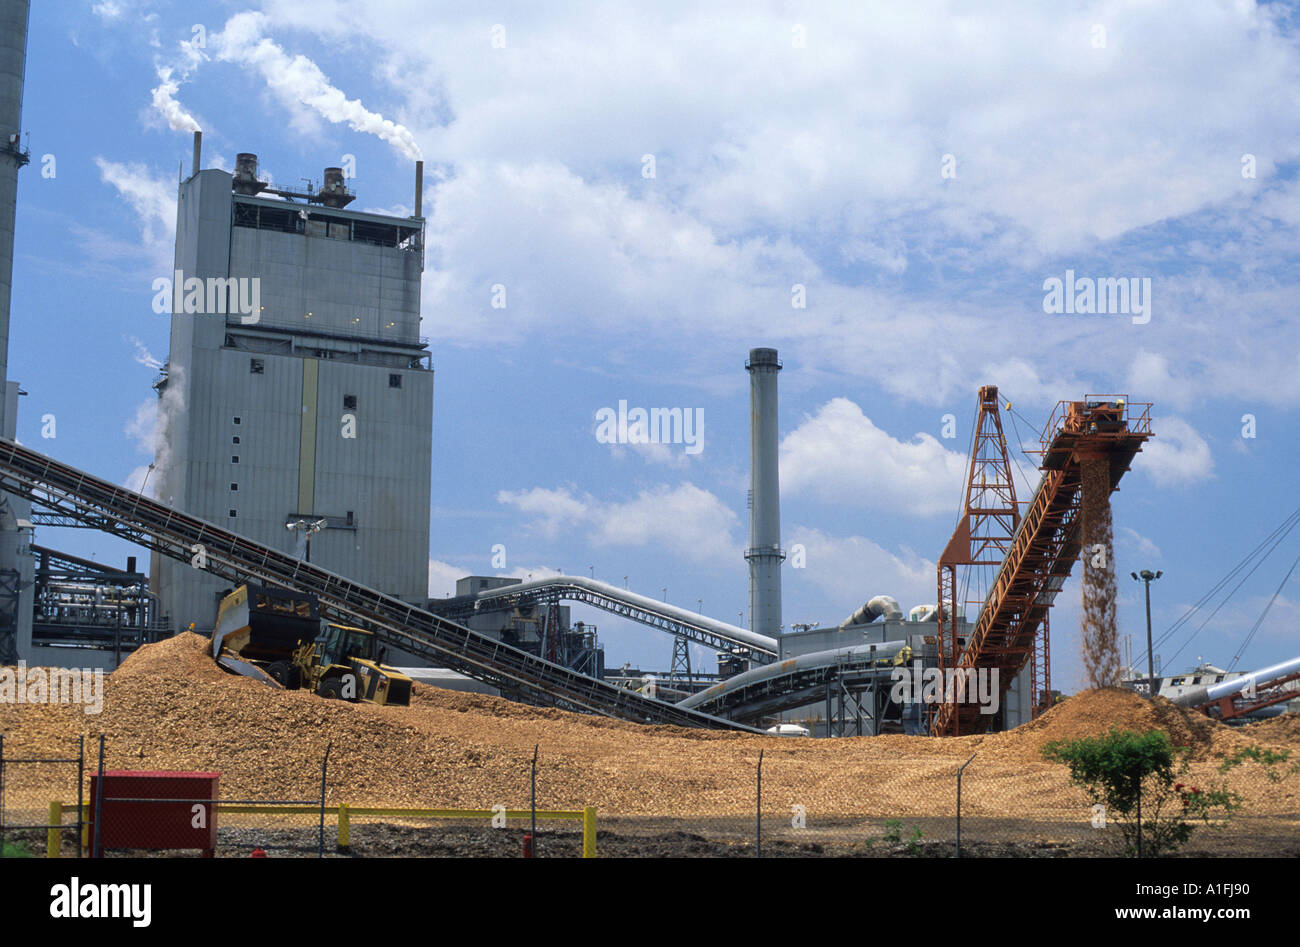 A paper mill at Stone Container in Port Wentworth Georgia Wood chips being piled as a step in manufacturing of paper  Stock Photo